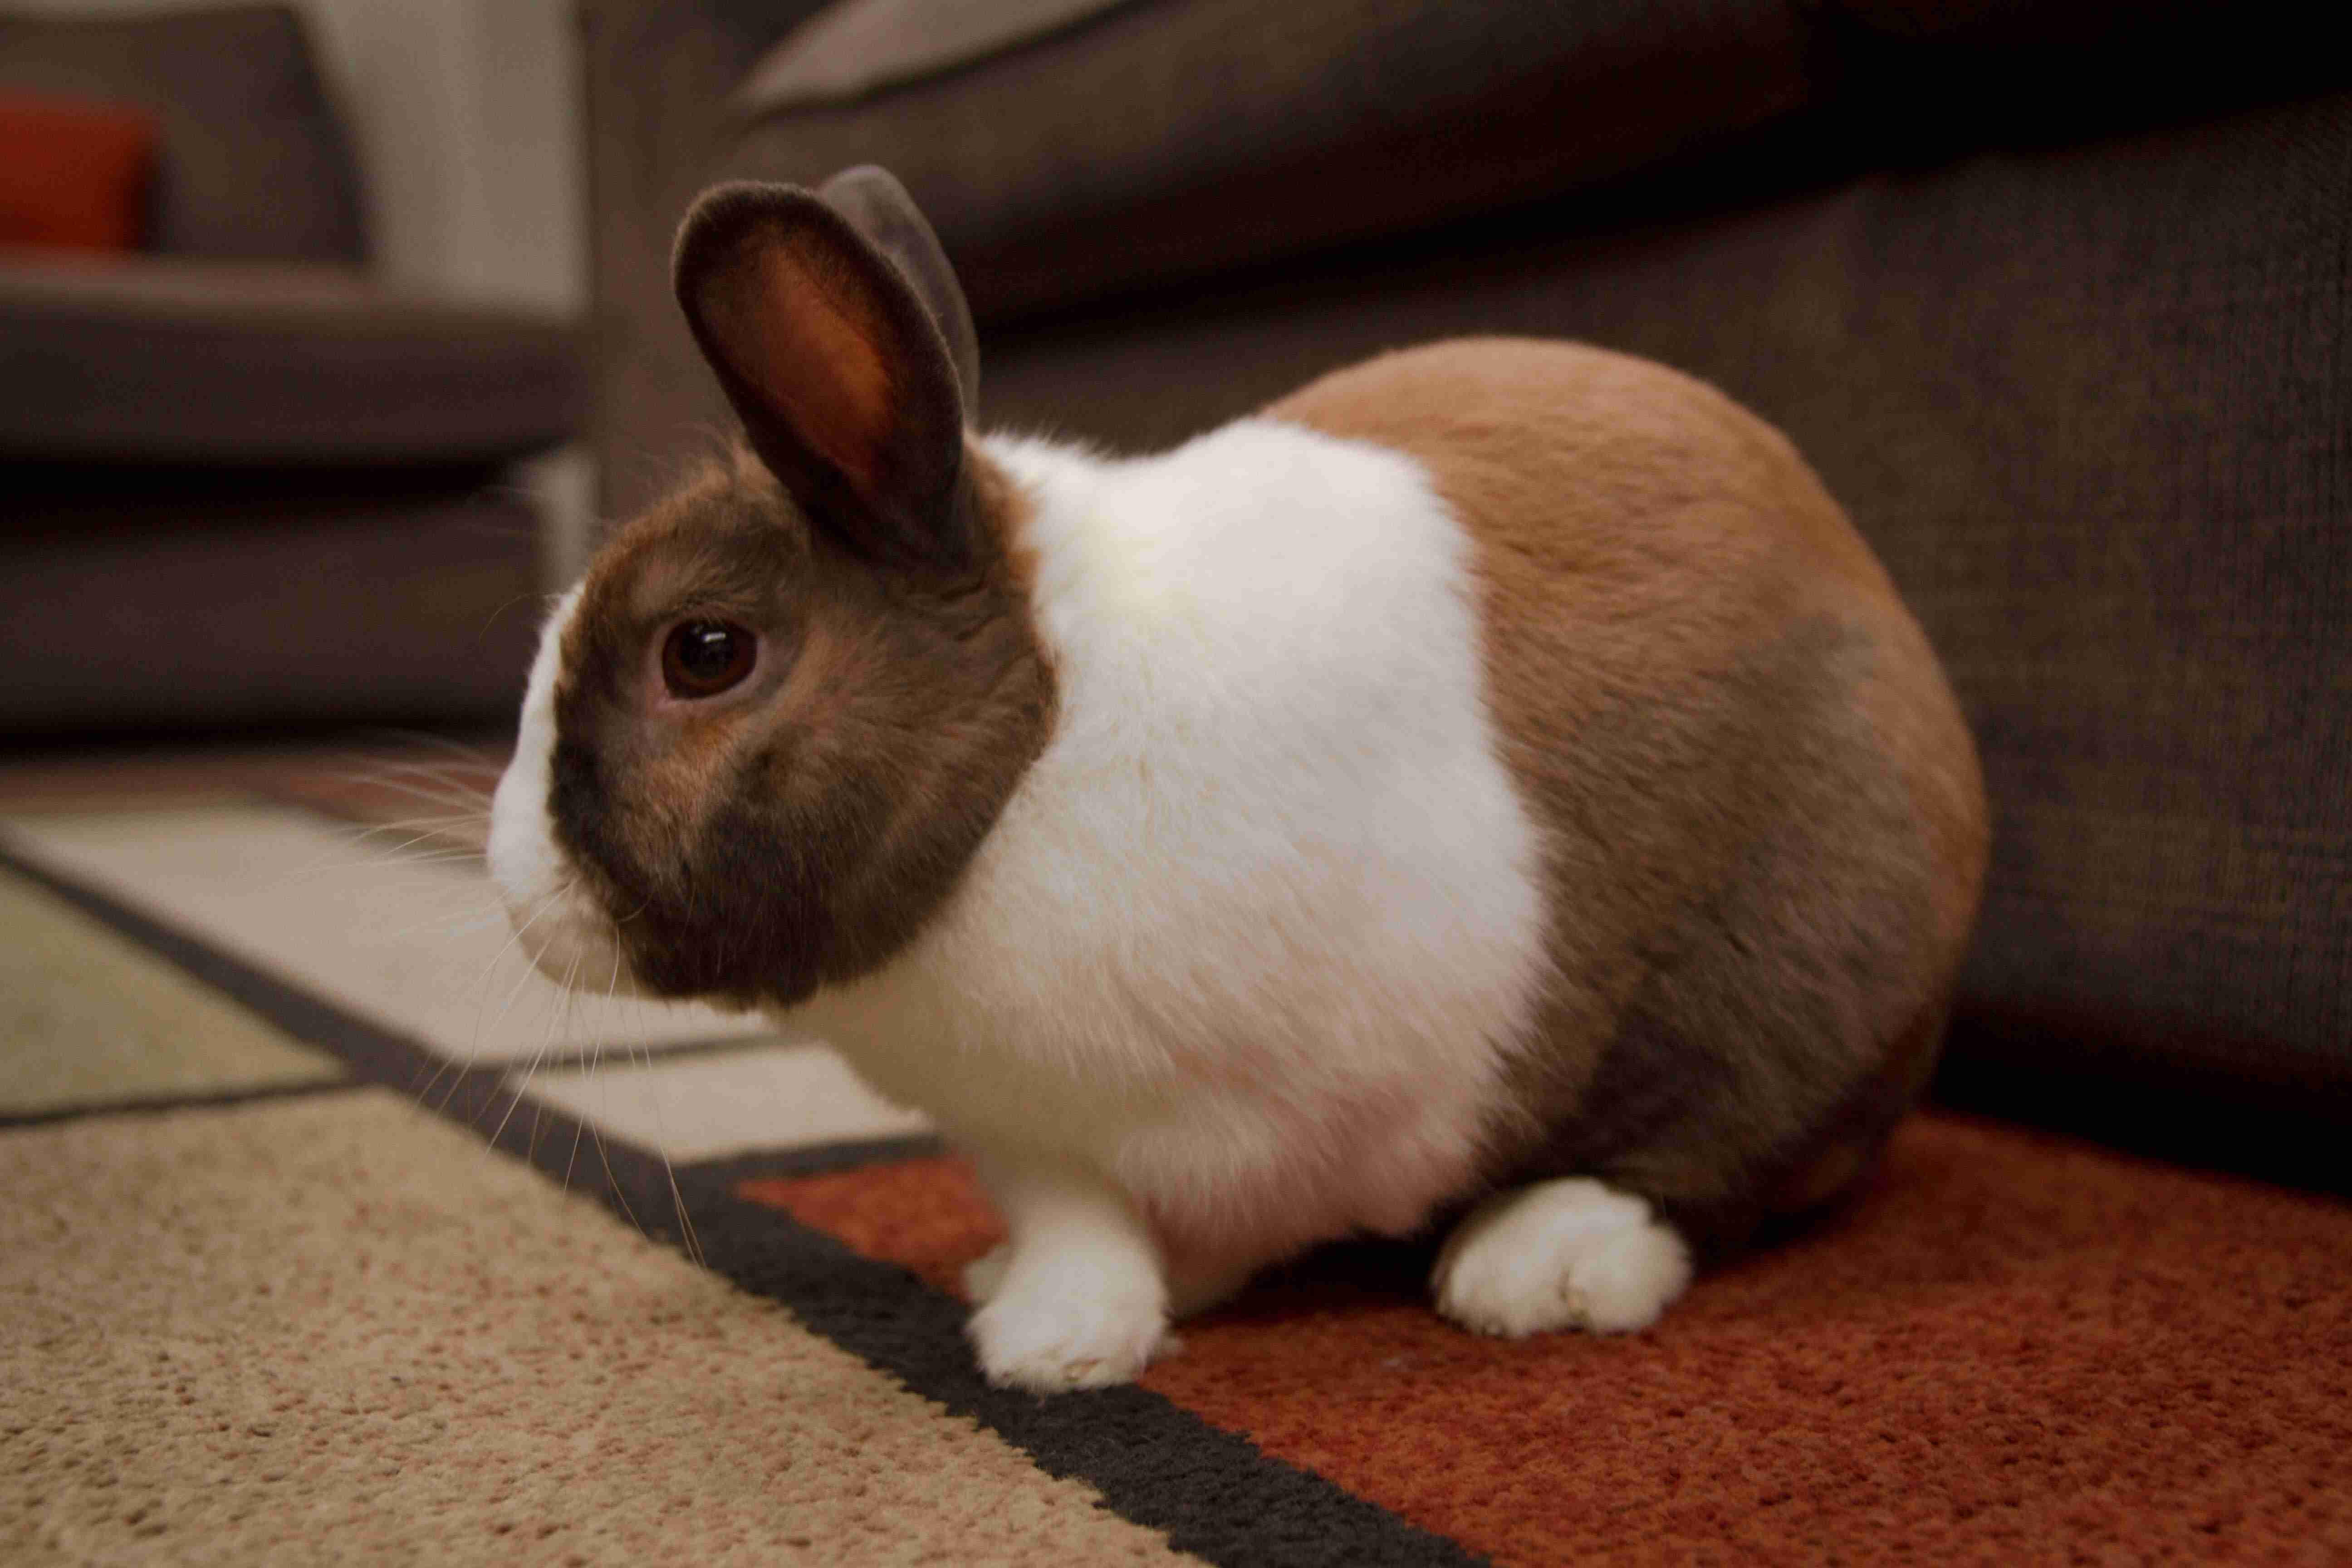 Protecting Your Furry Friends: A Guide to Preventing and Treating Common Parasites in Rabbits